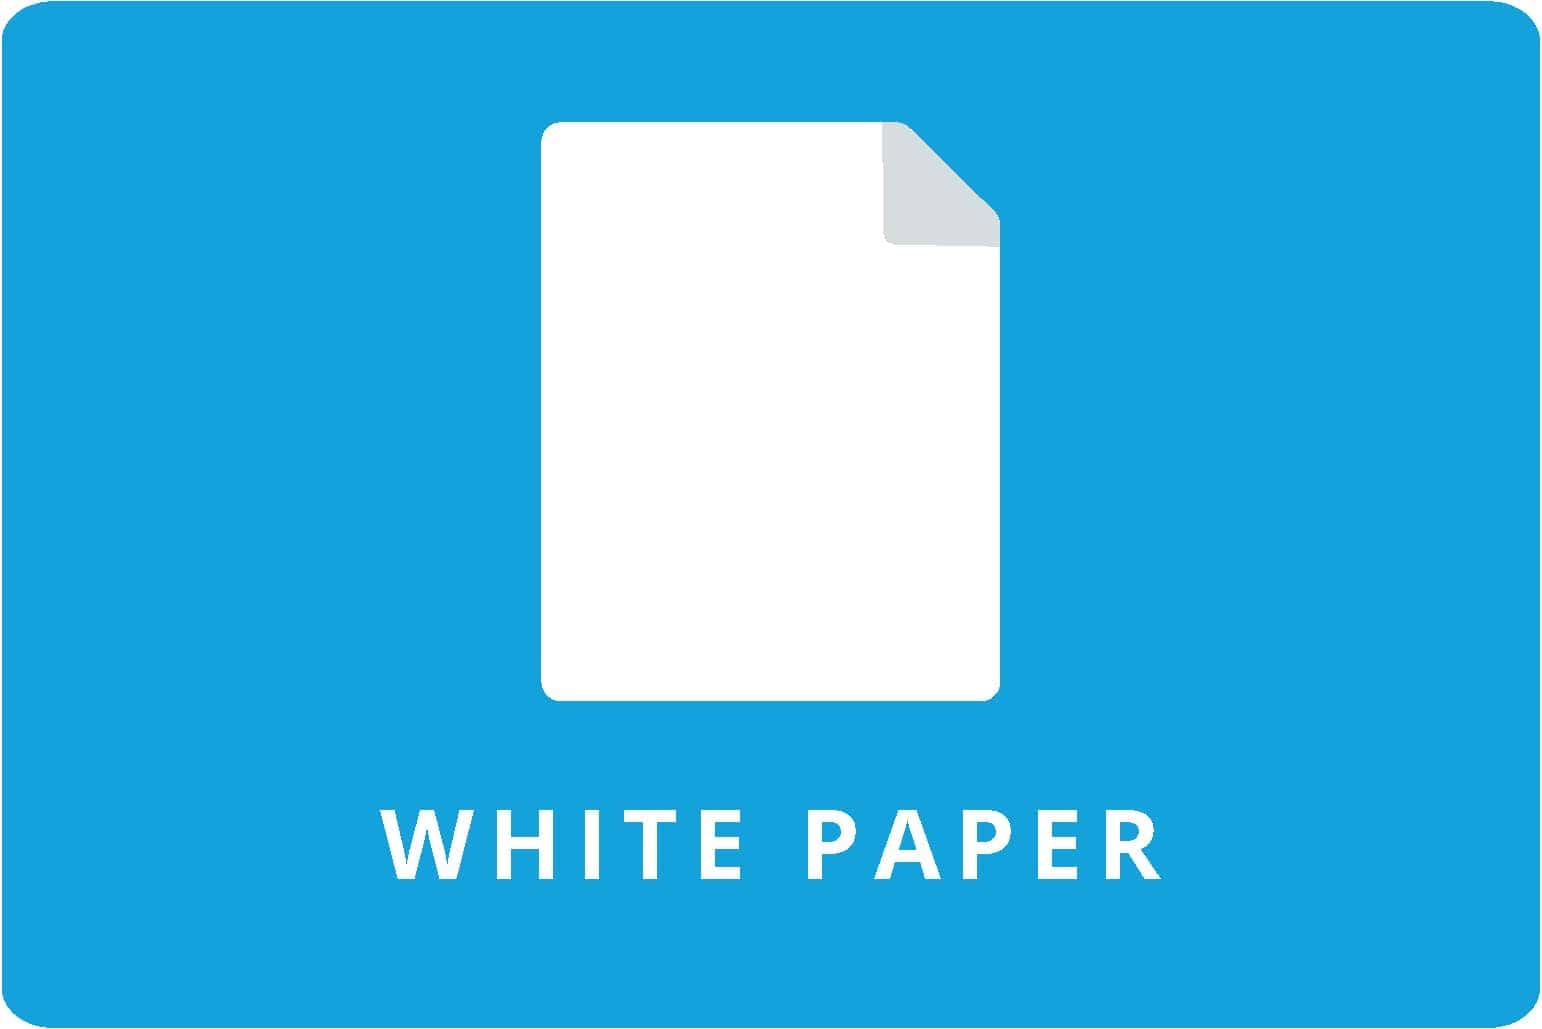 What exactly is a white paper?